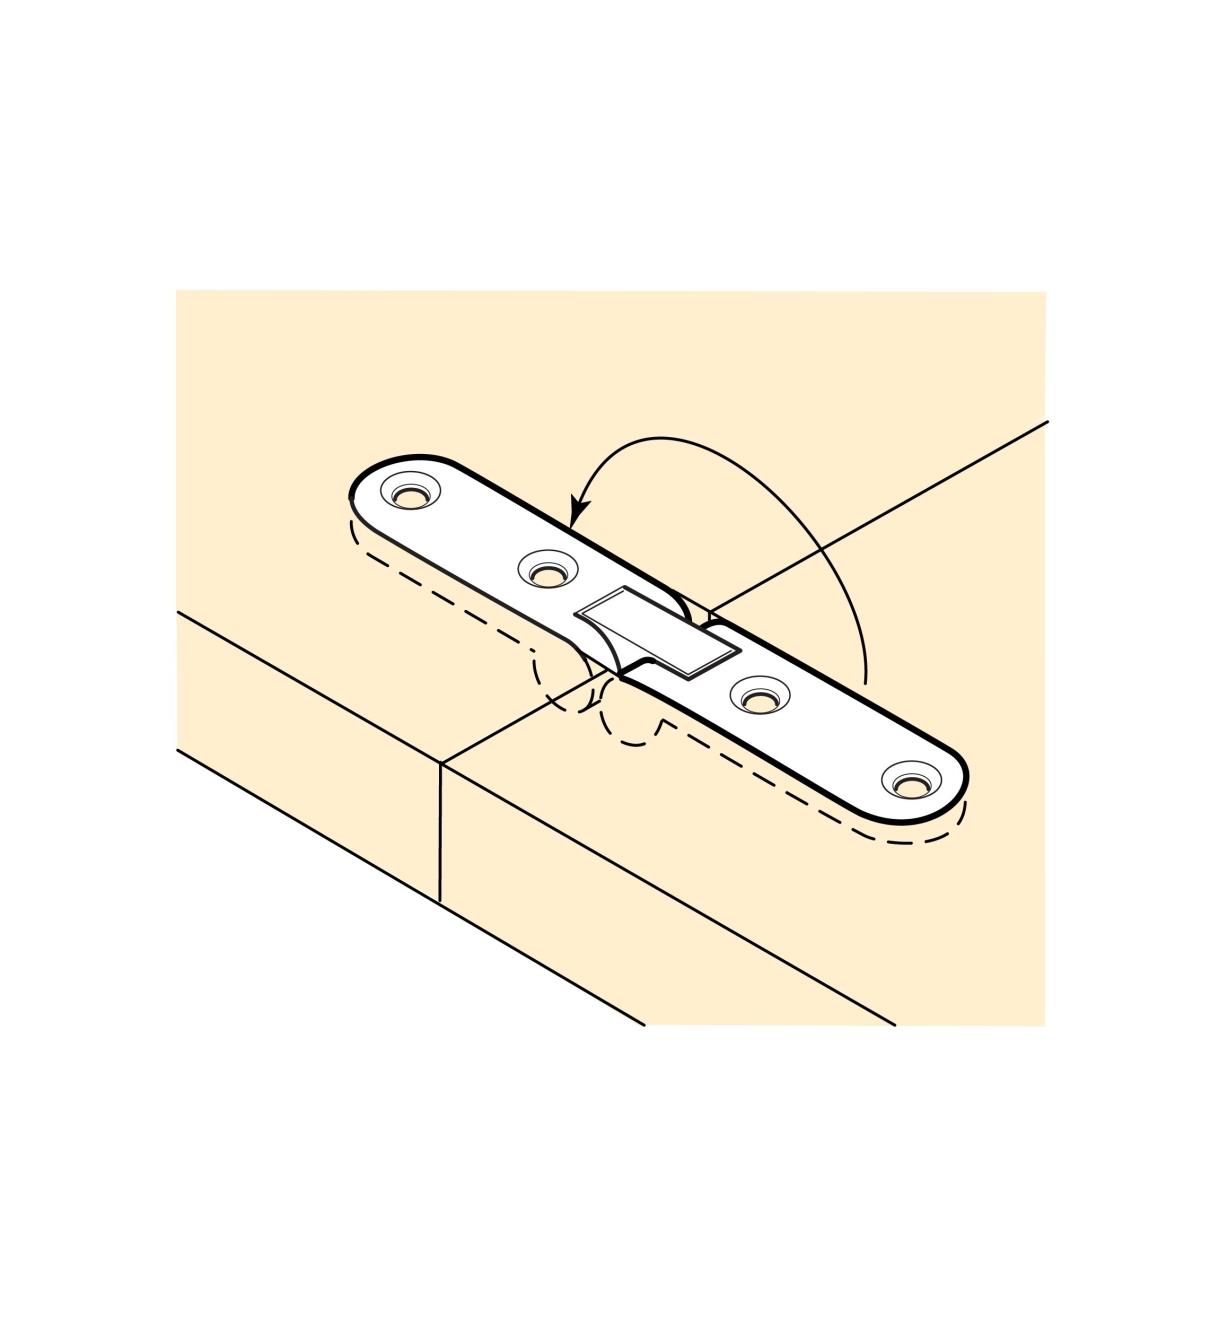 Illustration of Flip-Top Hinge mounted in a folding table